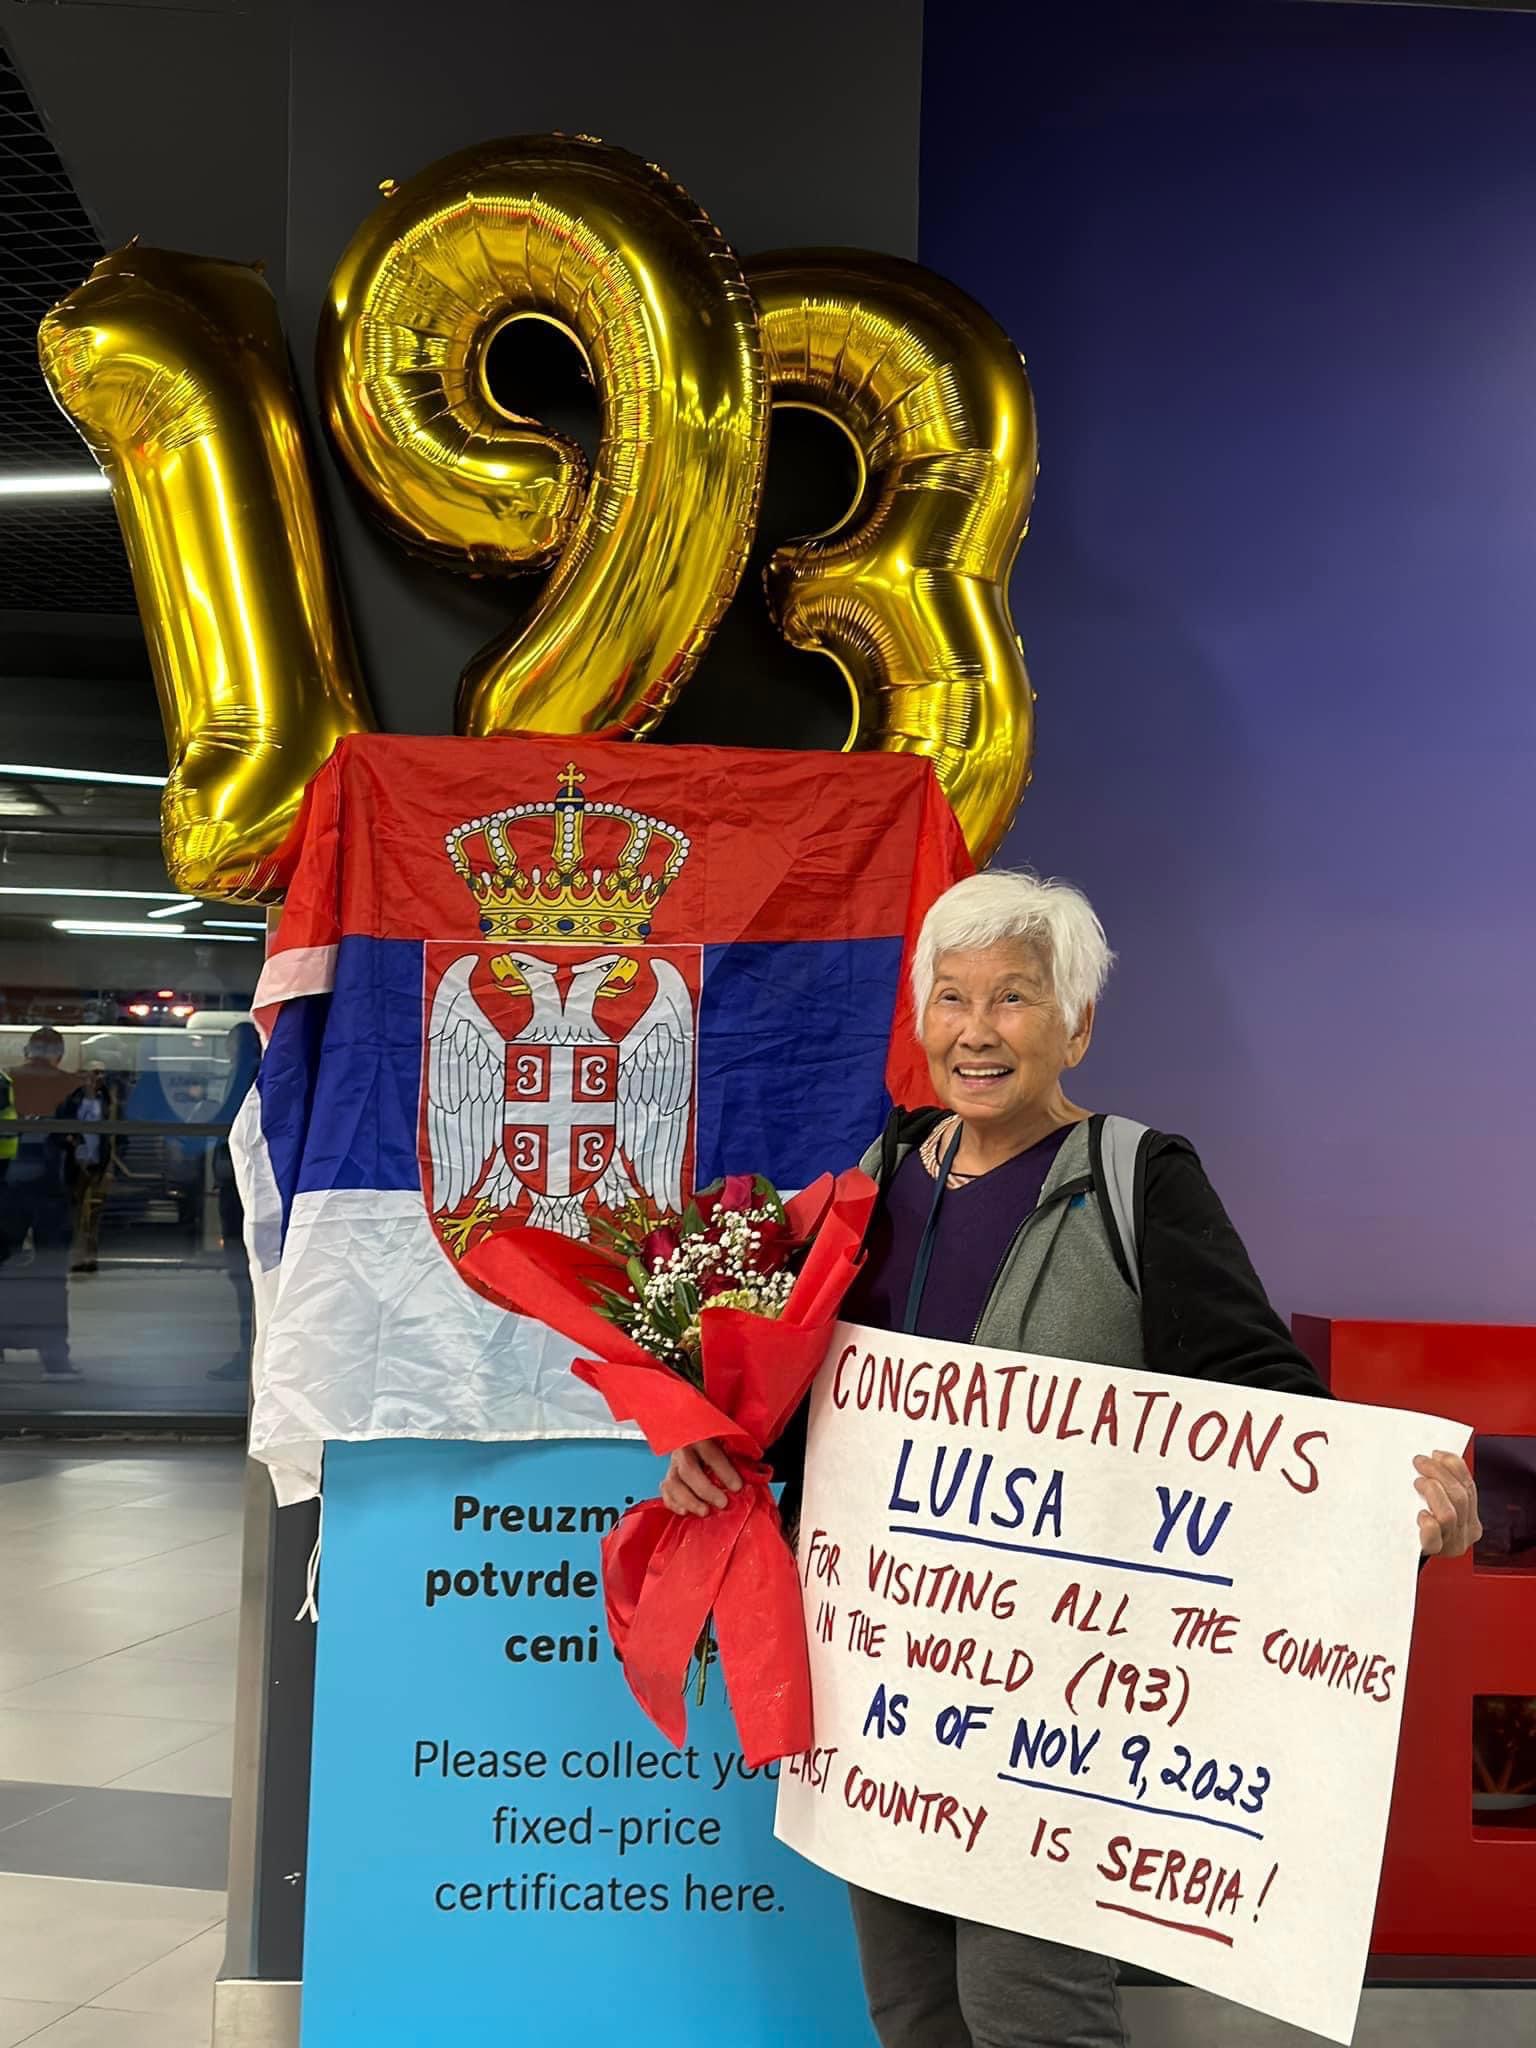 Luisa Yu, 79, arrives in Belgrade, Serbia, on November 9, 2023. Serbia was her last country to visit, completing all 193 United Nations-recognized countries across the globe